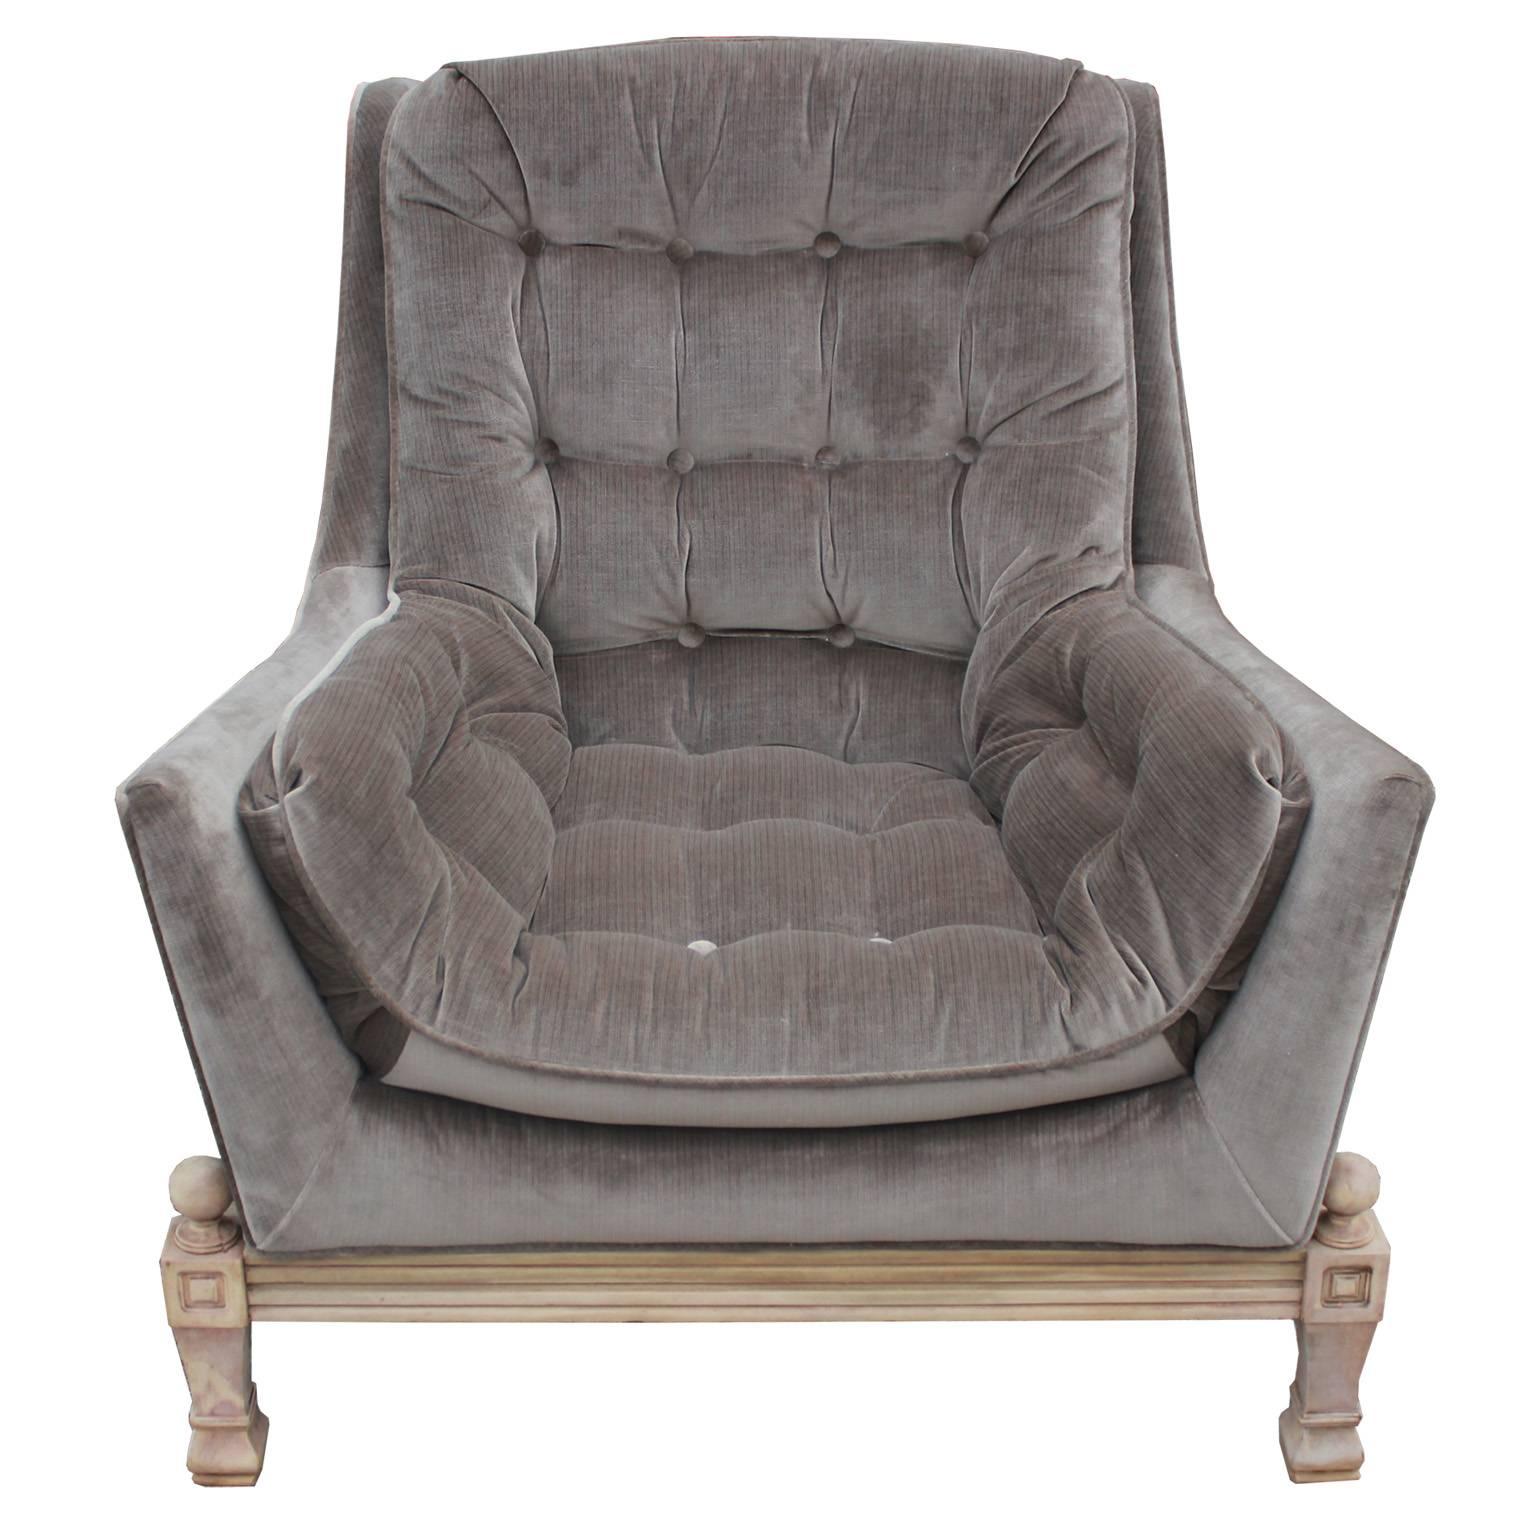 Striking Hollywood Regency style lounge chair and ottoman. Chair are freshly upholstered in a luxe grey velvet with a subtle pinstripe. Bases have a traditional feel which nicely complement the modern lines of the seat. Bases are finished in raw